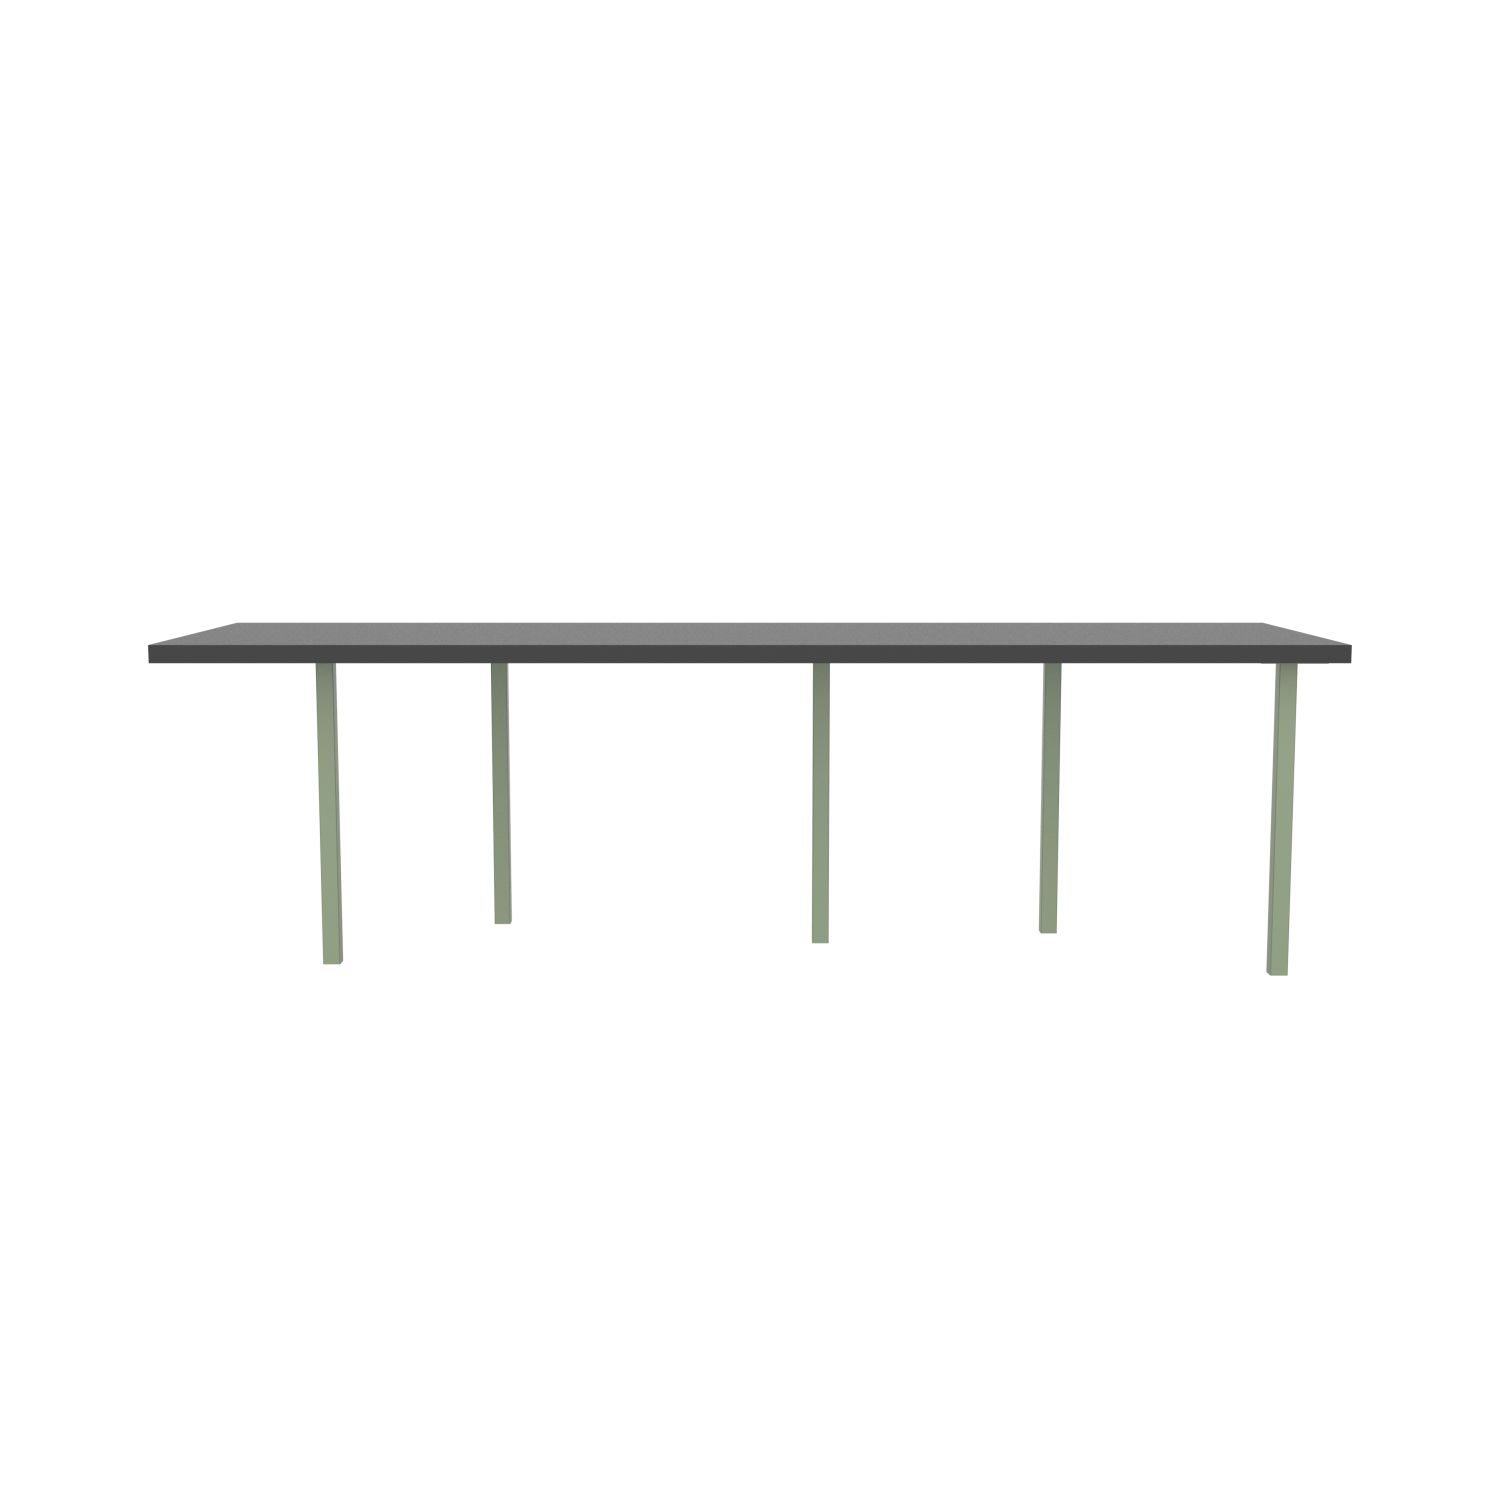 lensvelt bbrand table five fixed heigt 80x264 hpl black 50 mm price level 1 green ral6021